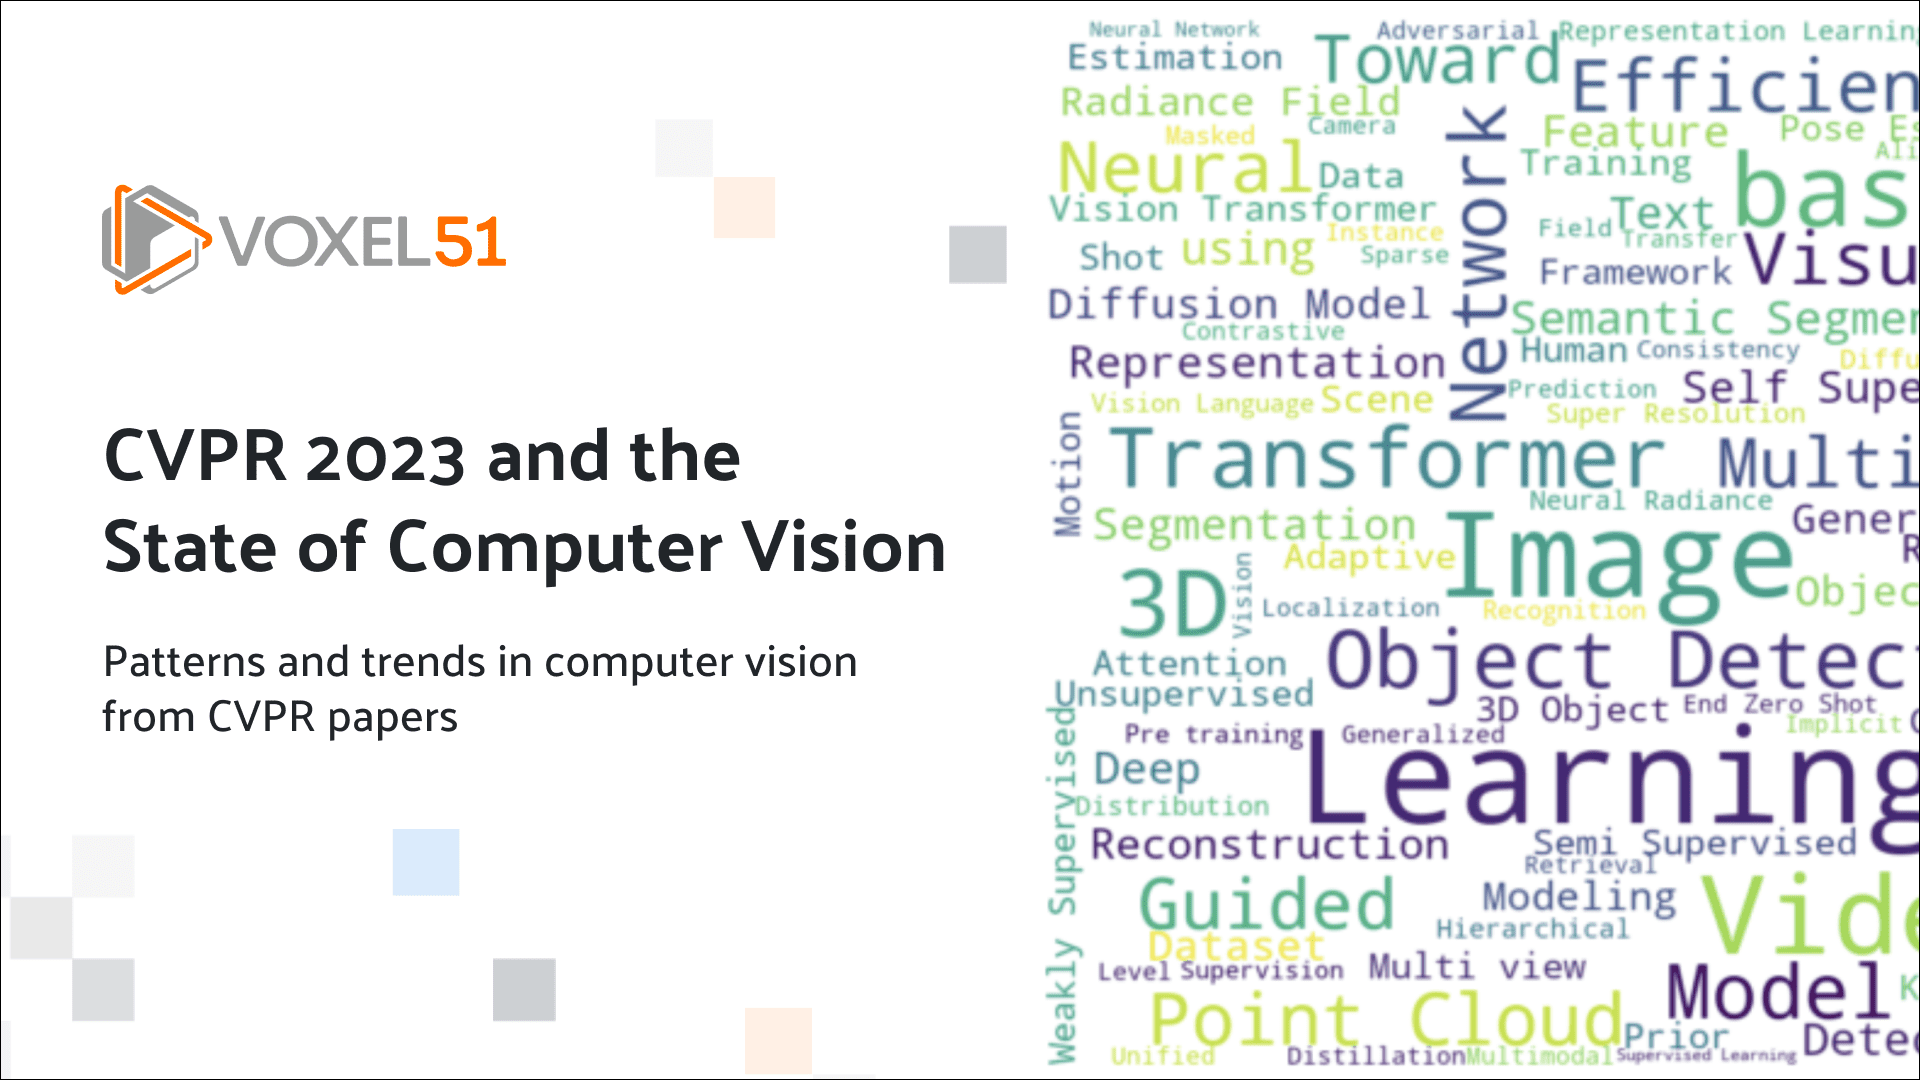 CVPR 2023 and the State of Computer Vision Voxel51